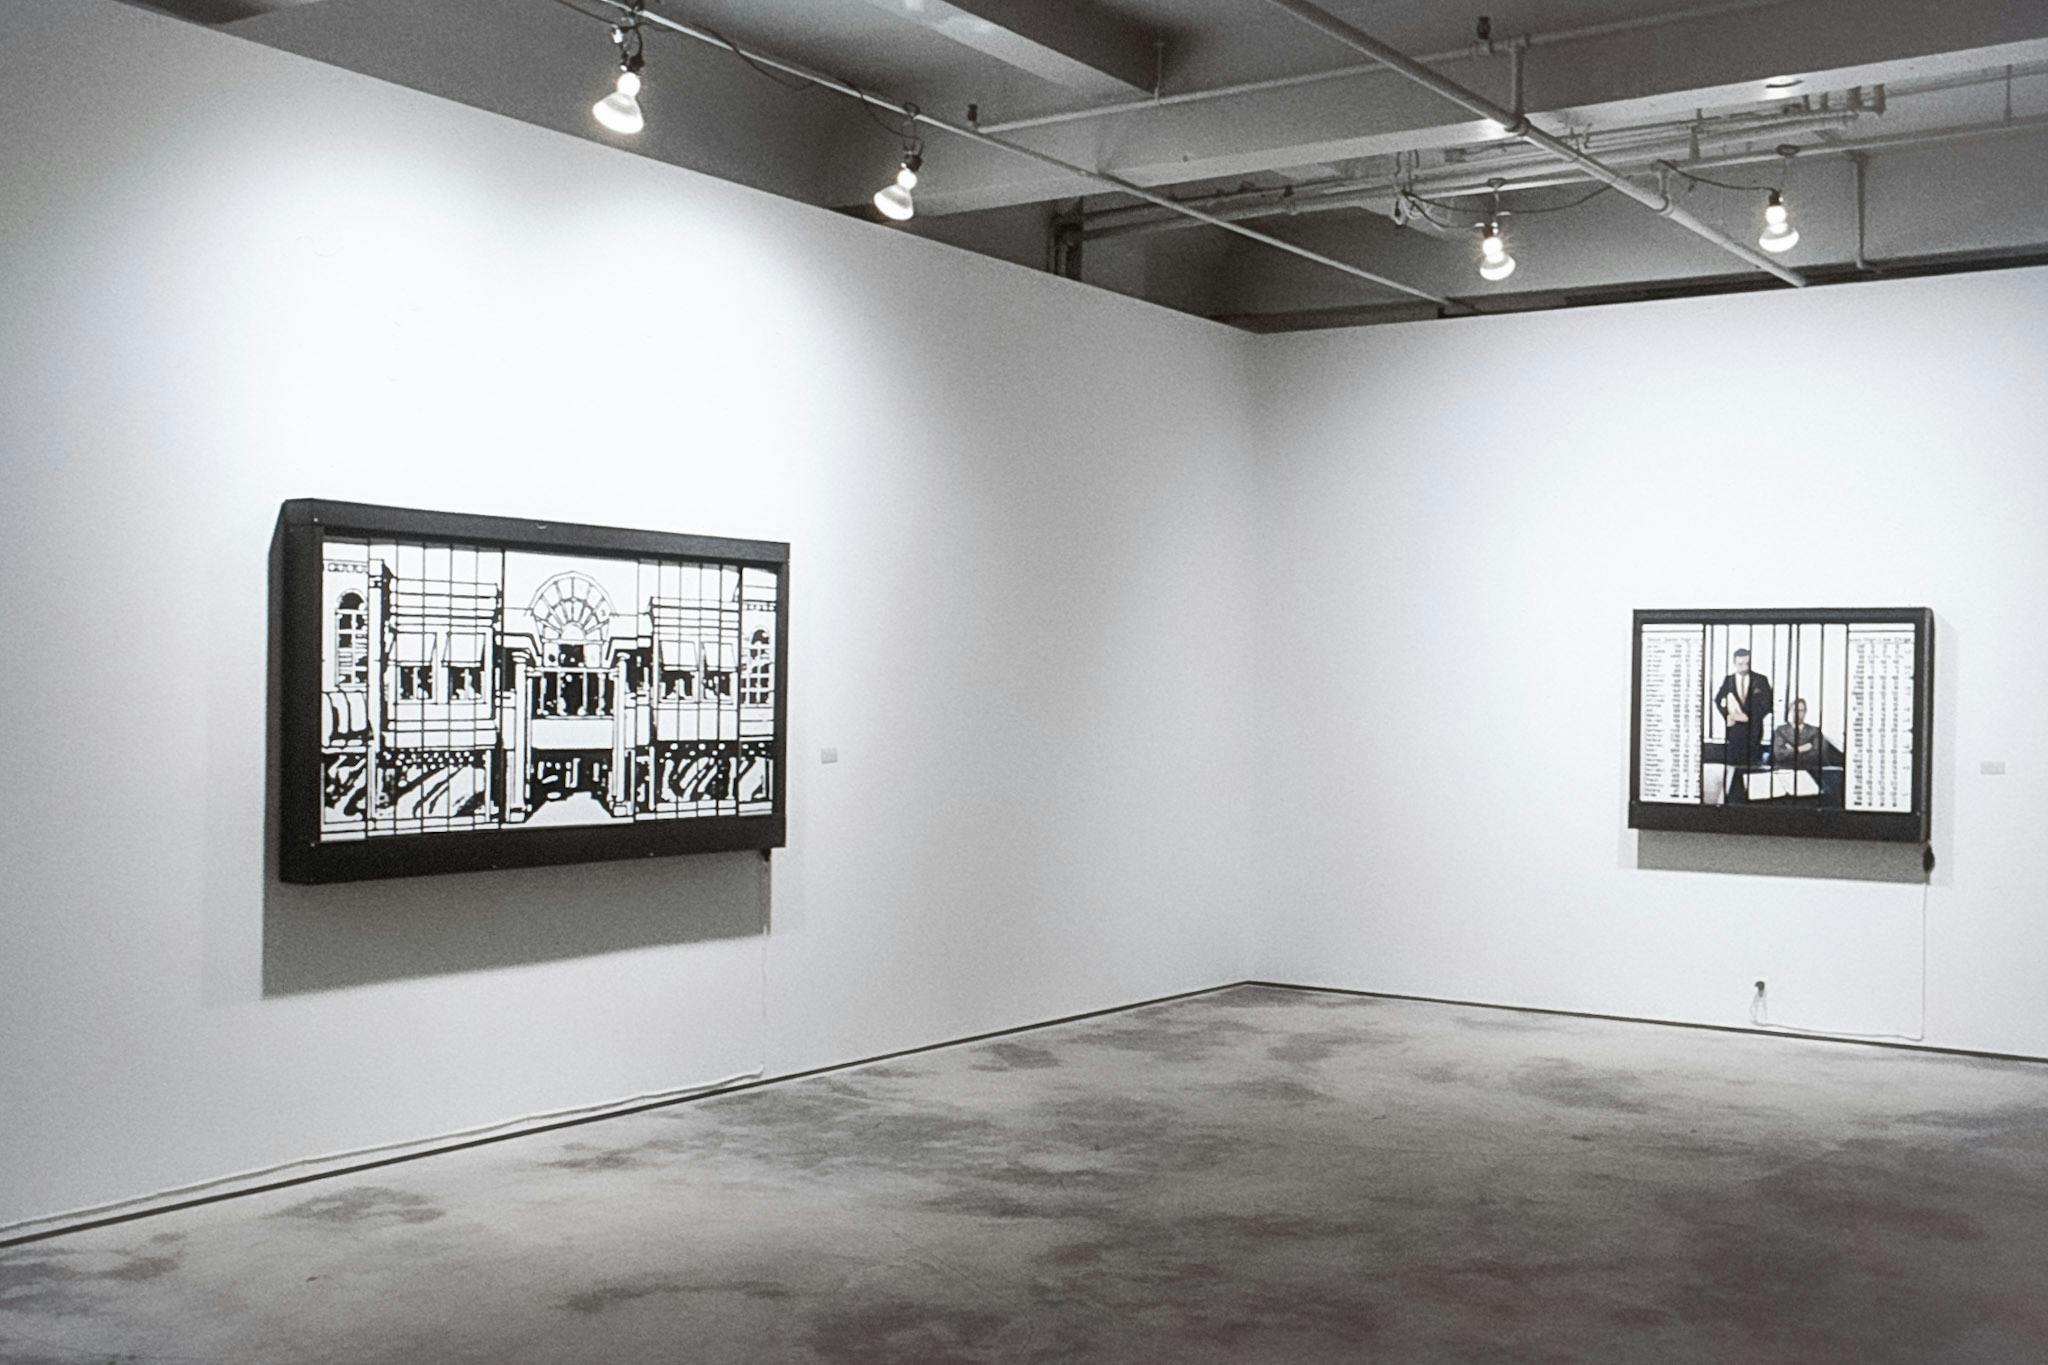 Two horizontal artworks in large black frames, in the corner of a gallery. One had two fragmented architectural drawings. The other has a fragmented picture of people in suits and datasheets.